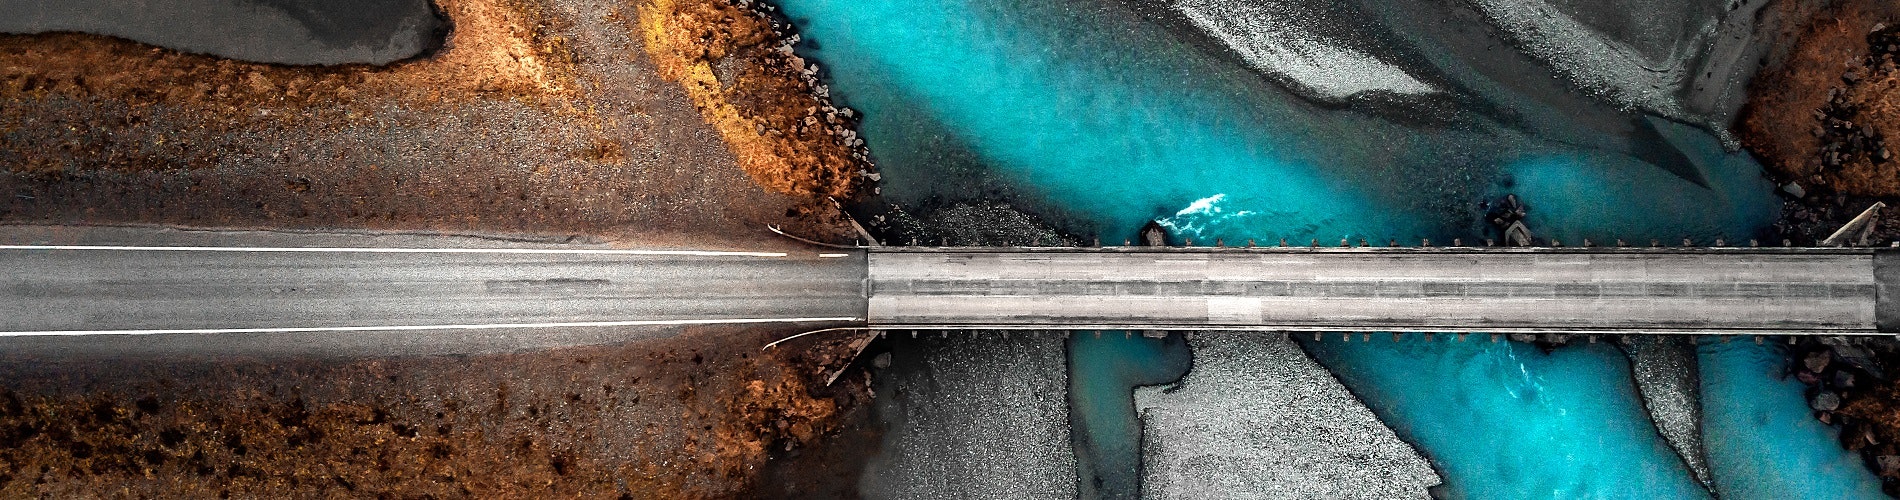 Aerial photo of a road and bridge in rural Iceland